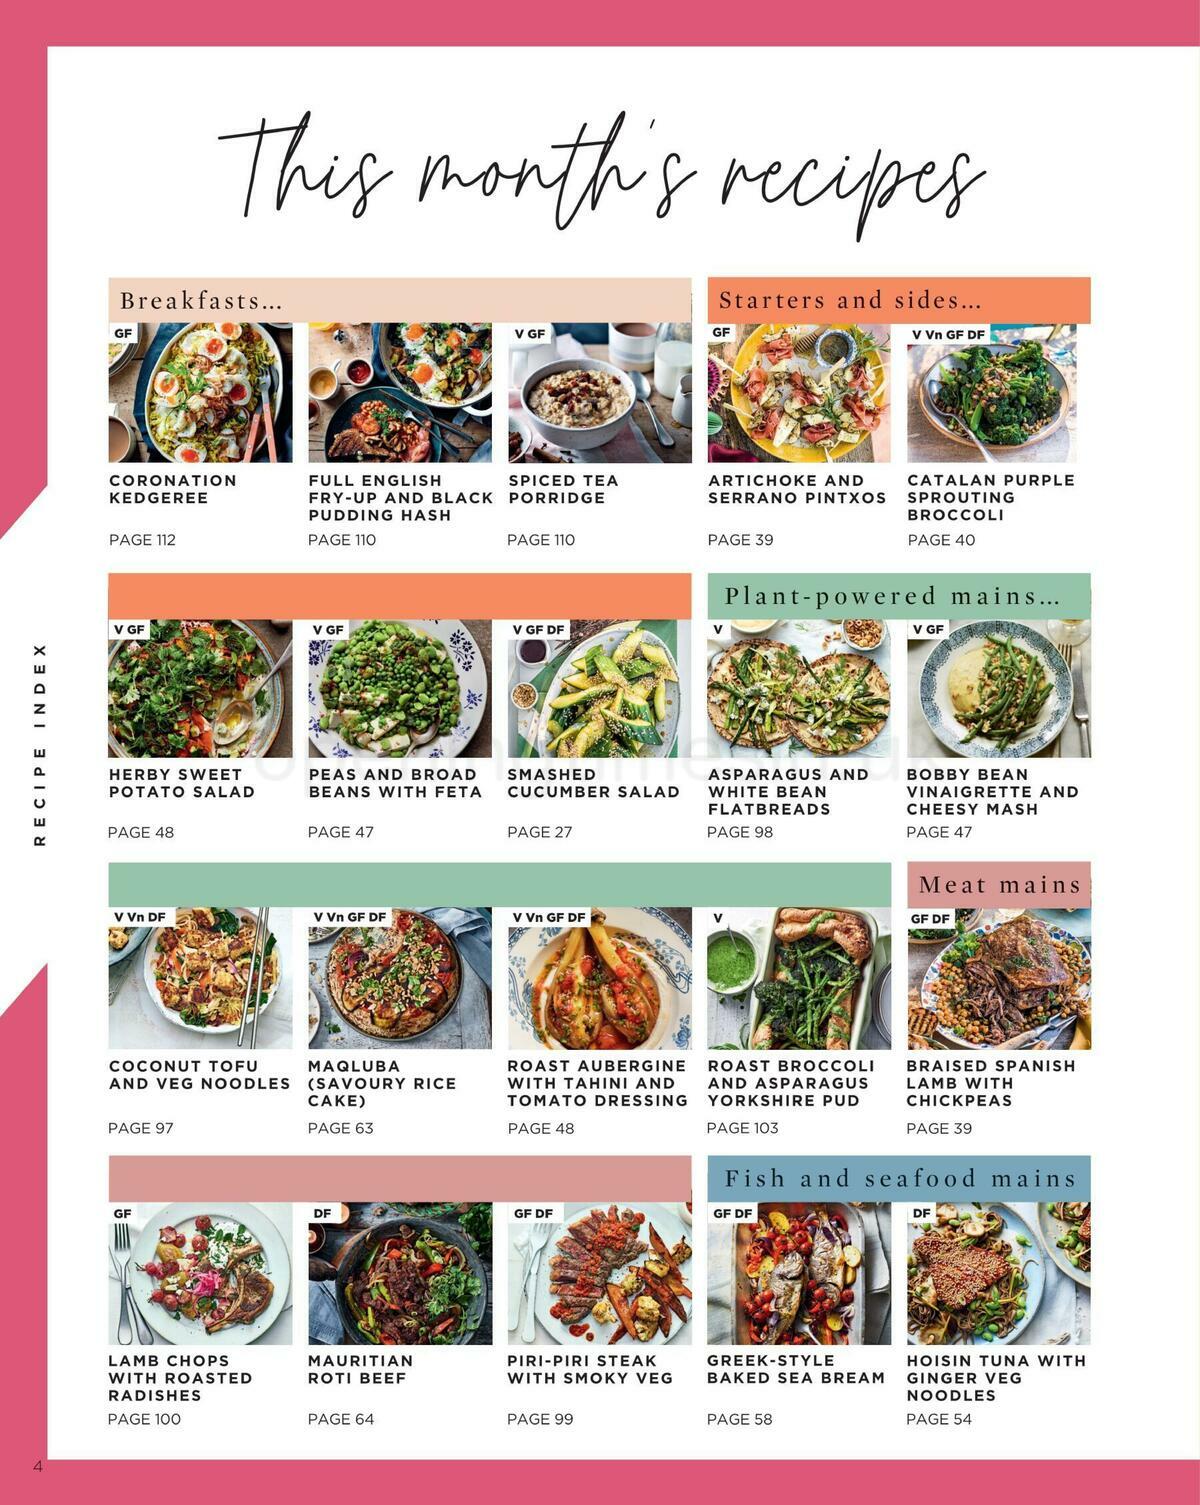 Sainsbury's Magazine April Offers from 1 April